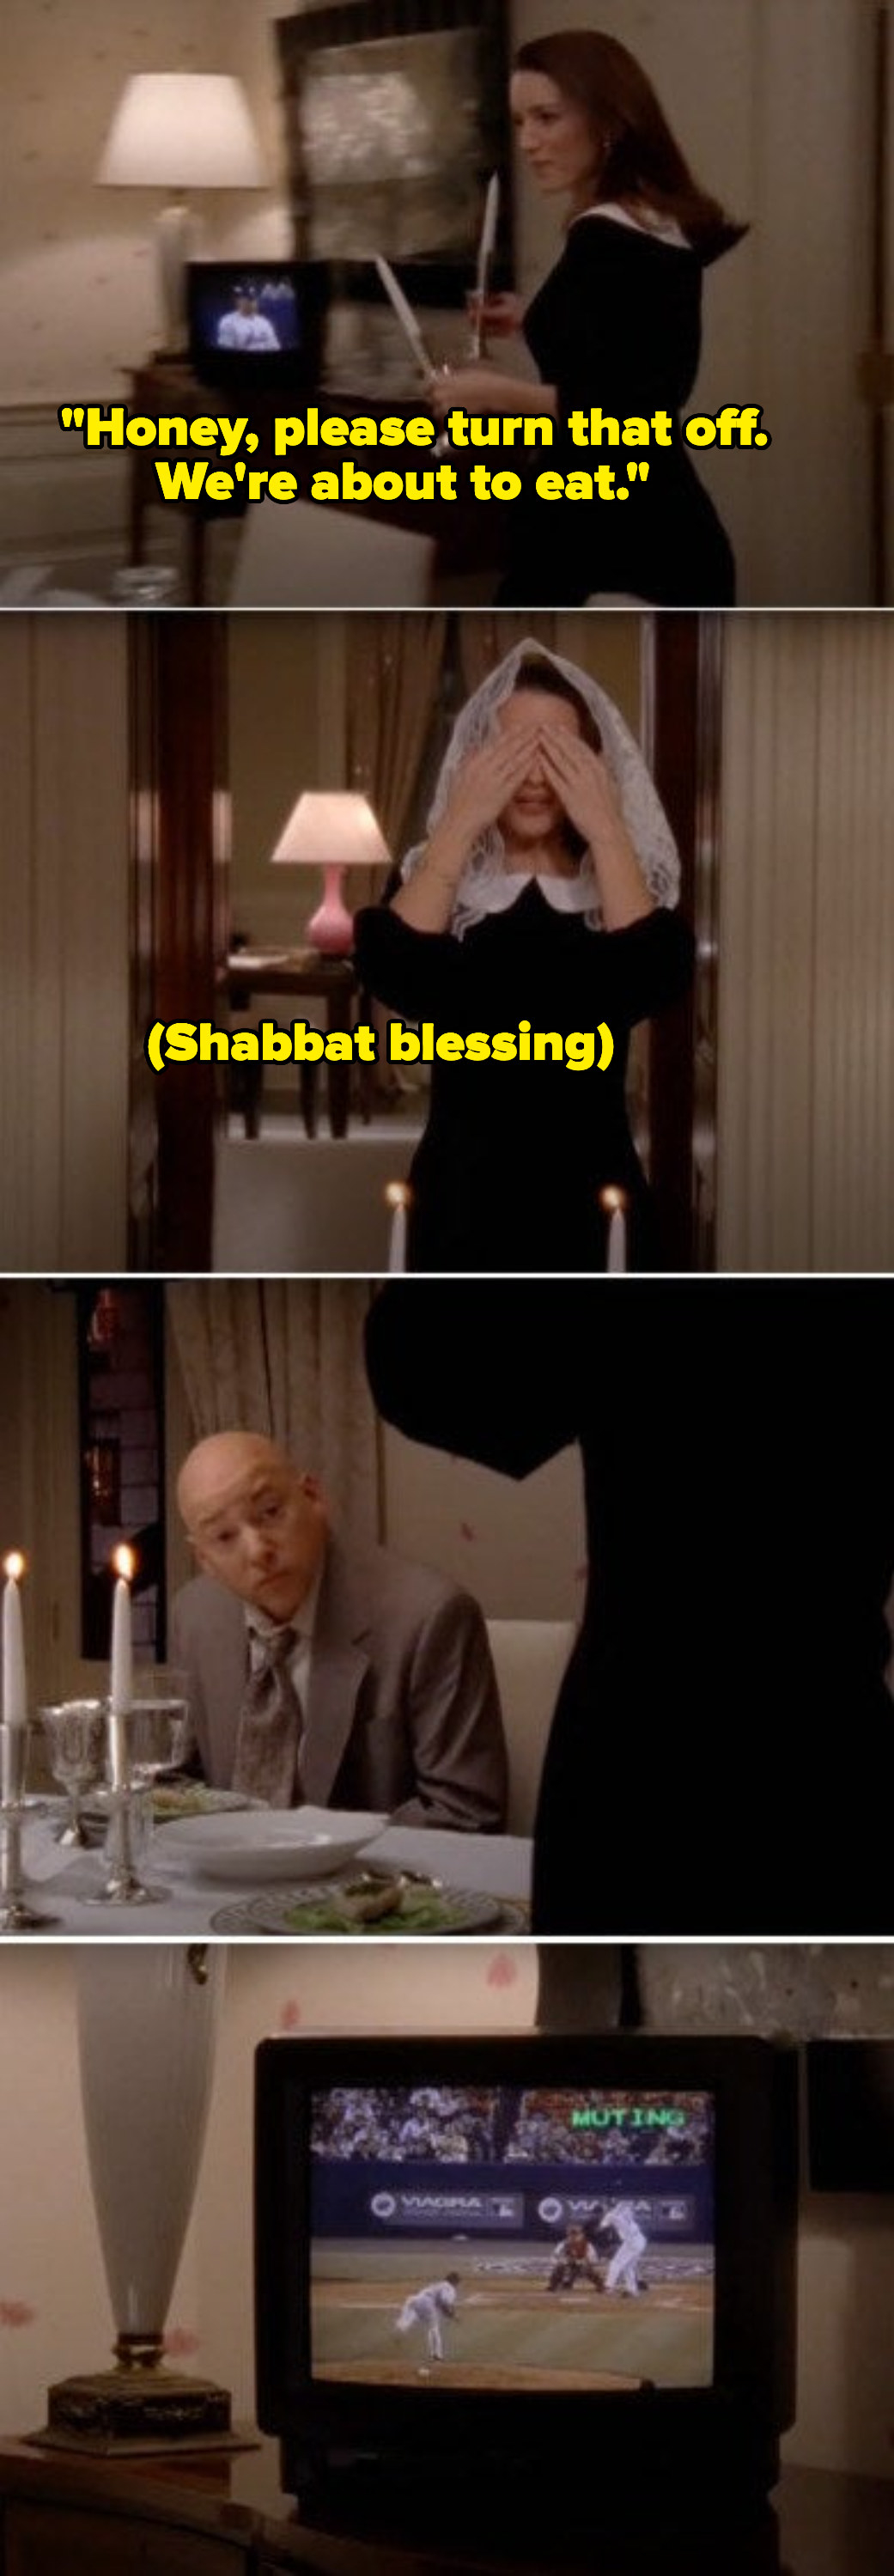 Charlotte saying the Shabbat blessing while Harry ignores her and stares at the TV